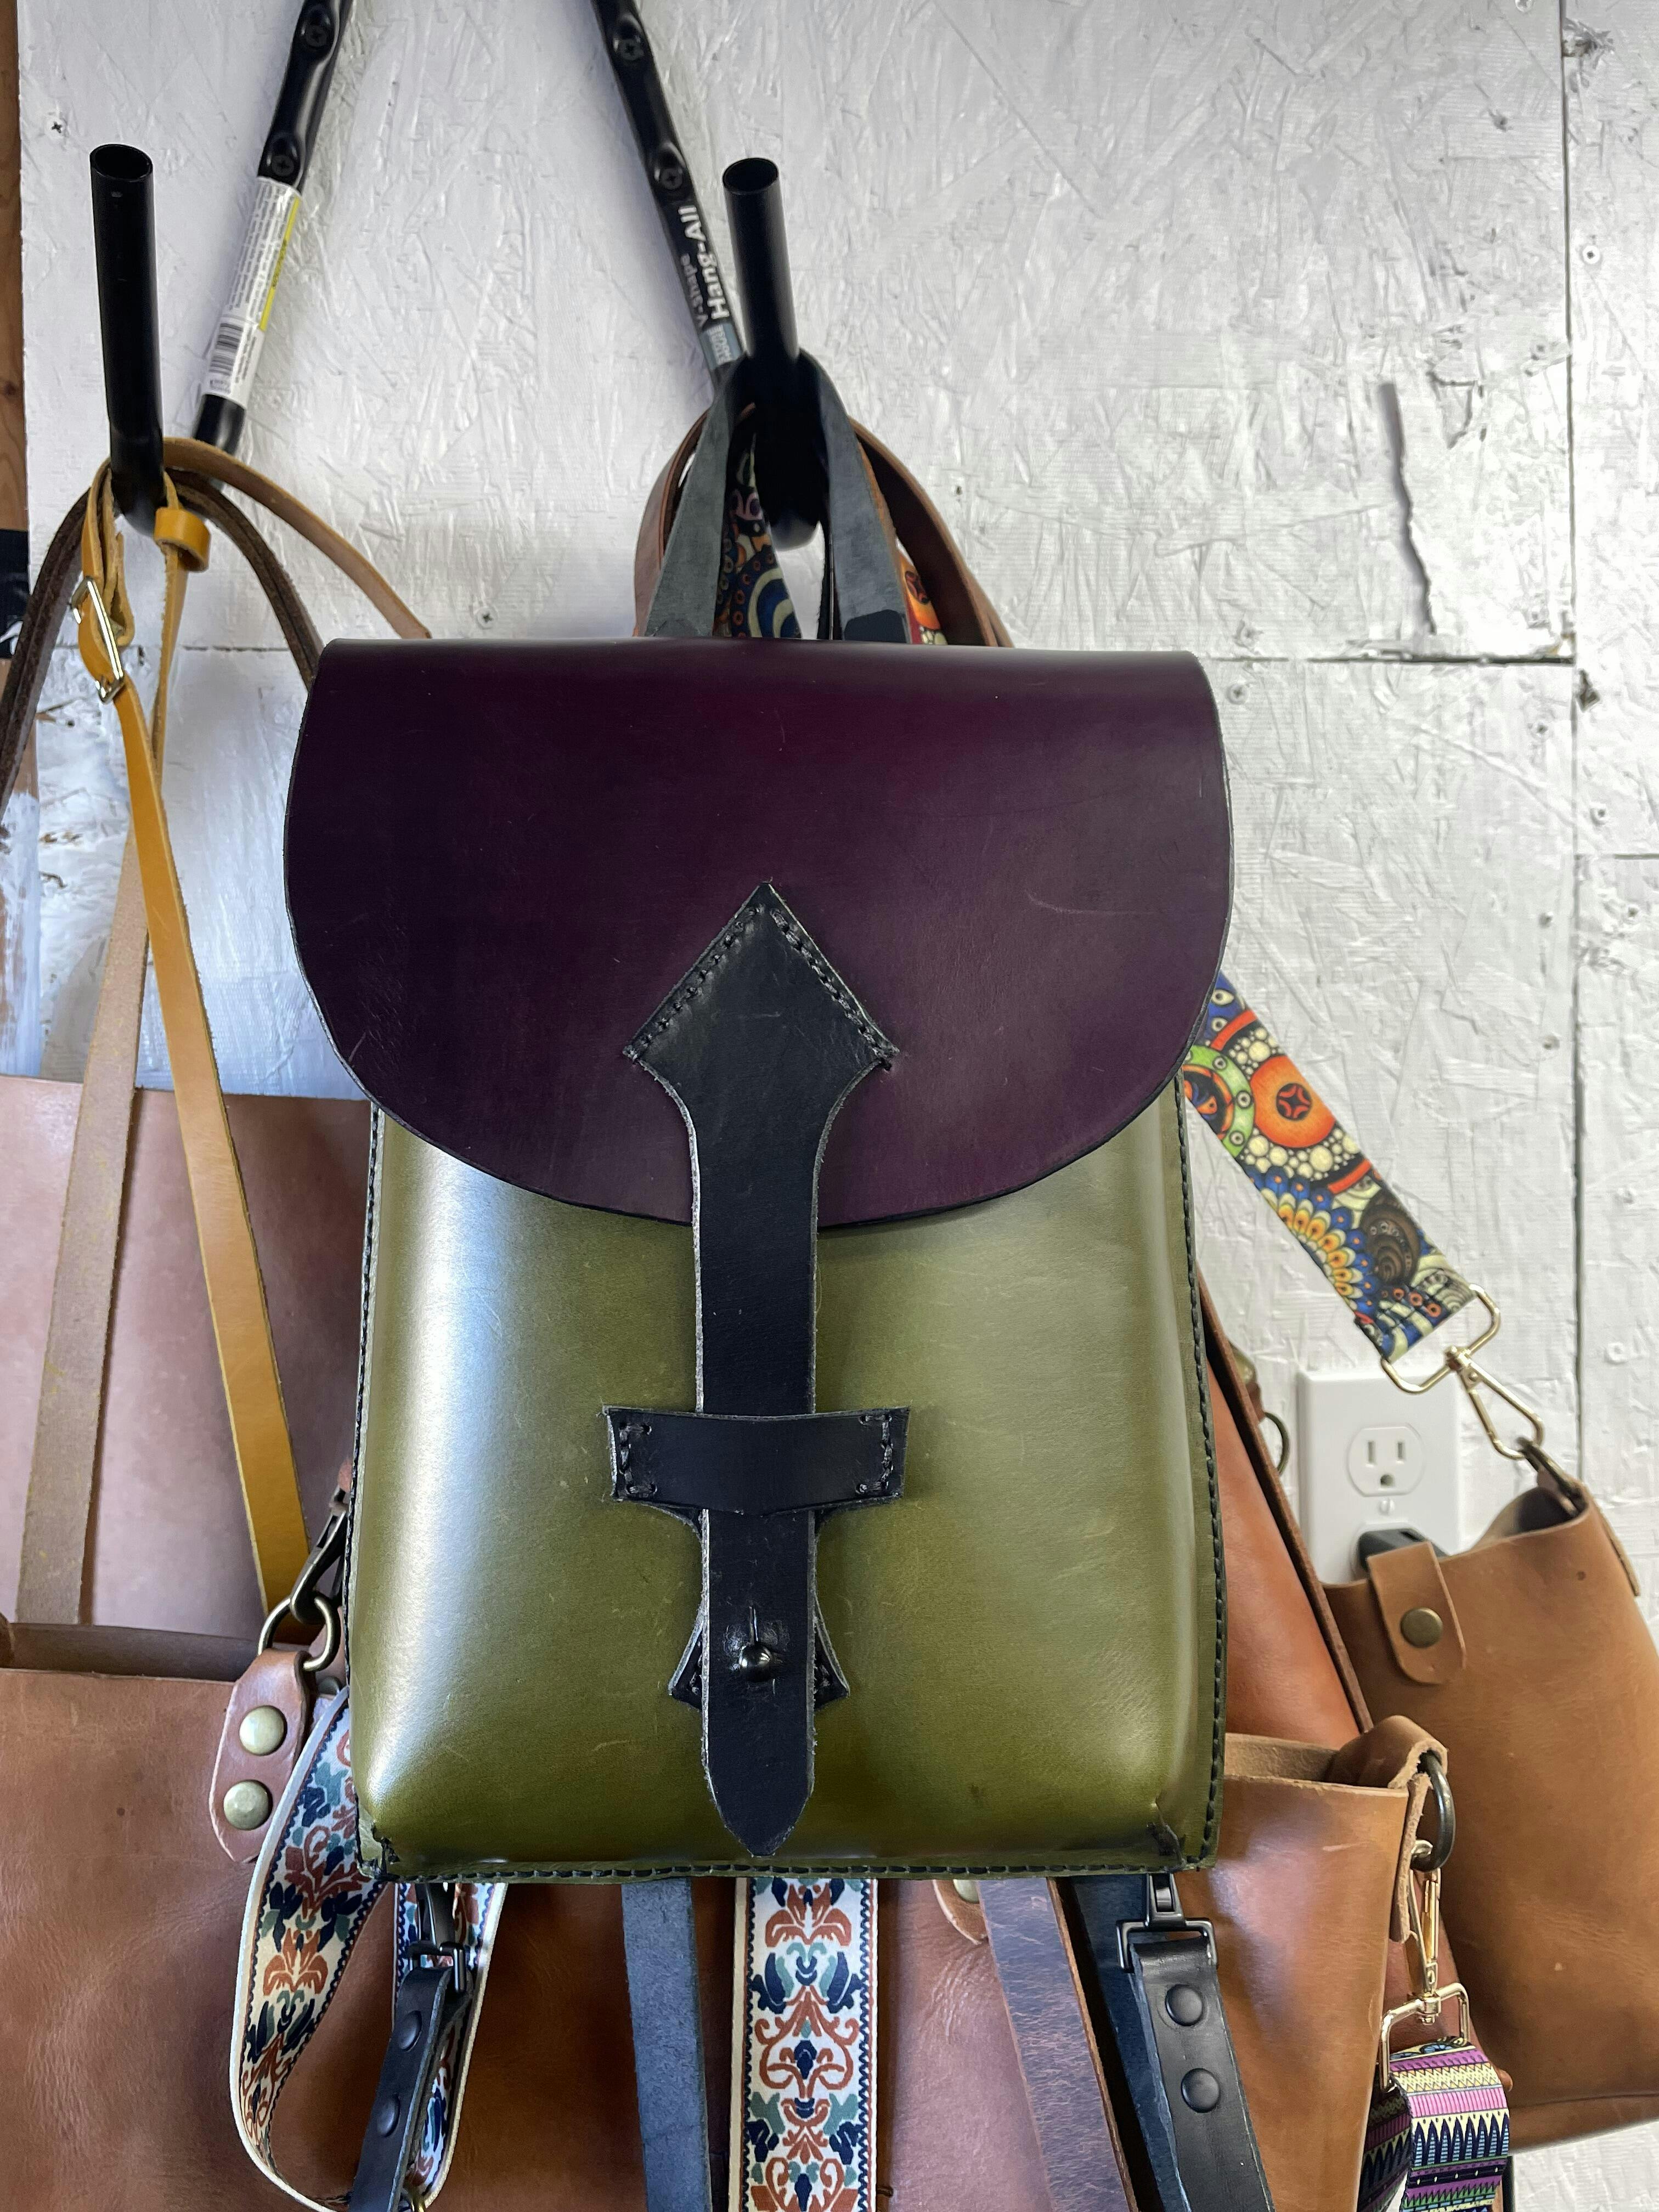 Leather Bag Pattern By Craftsmangus. Download PDF Patterns with VDOs.